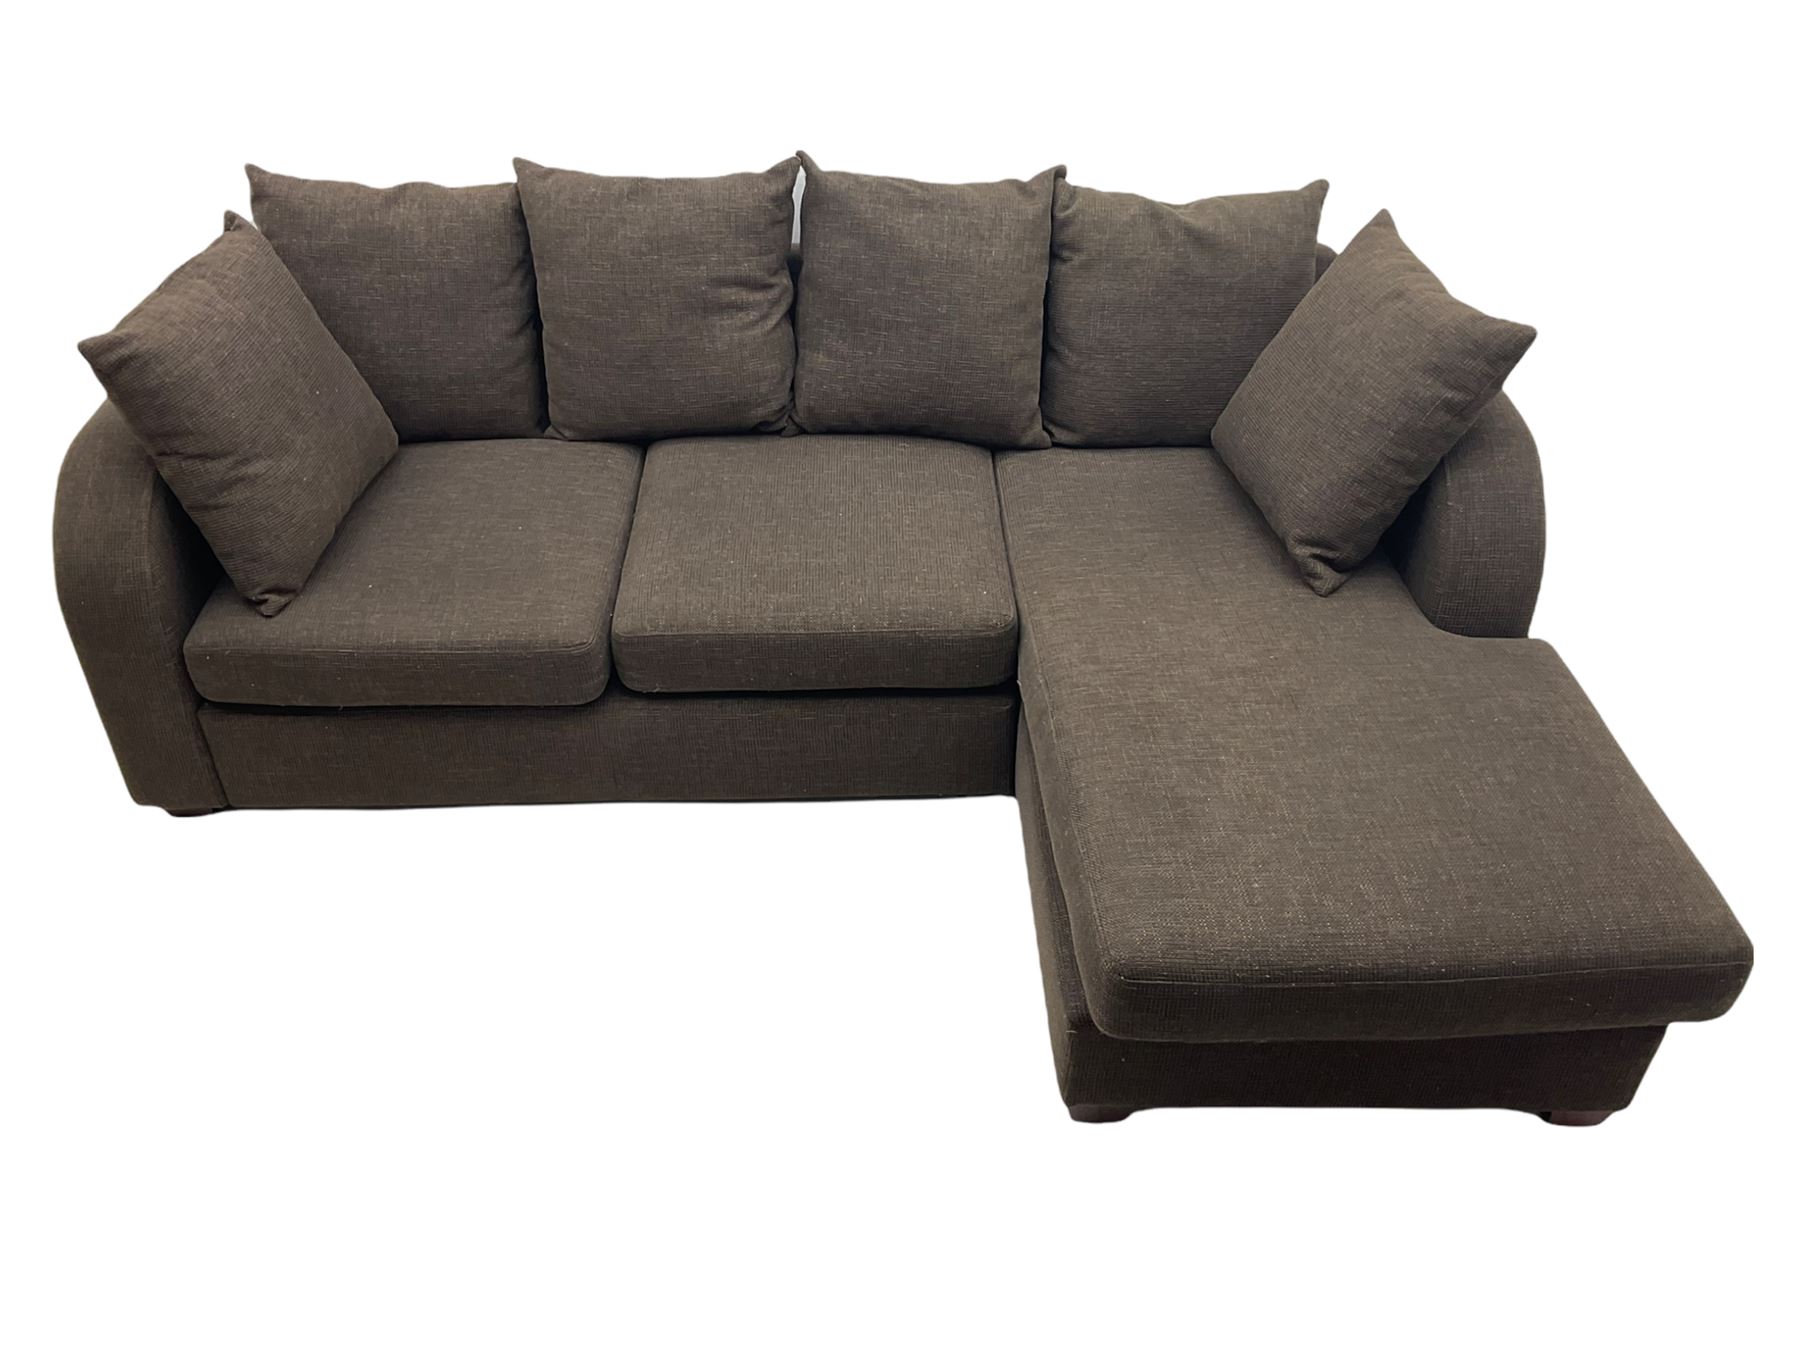 Corner sofa with right hand chaise - Image 5 of 8